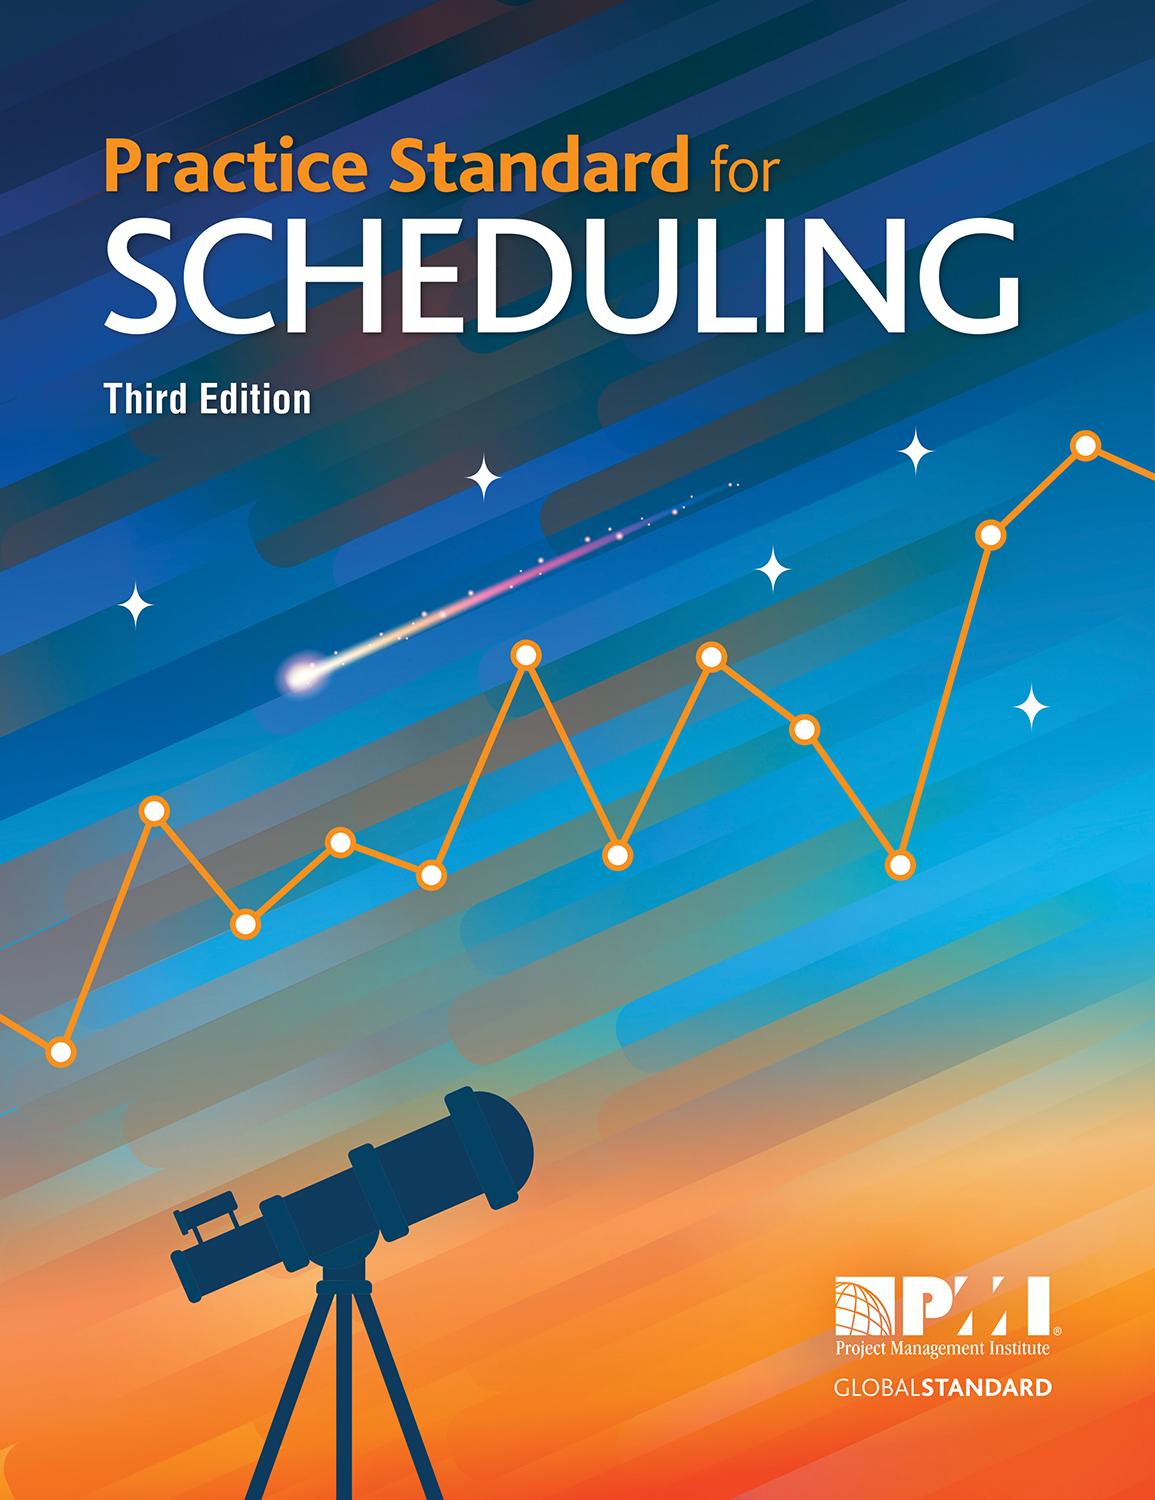 practice-standard-for-scheduling-3rd-edition.jpg